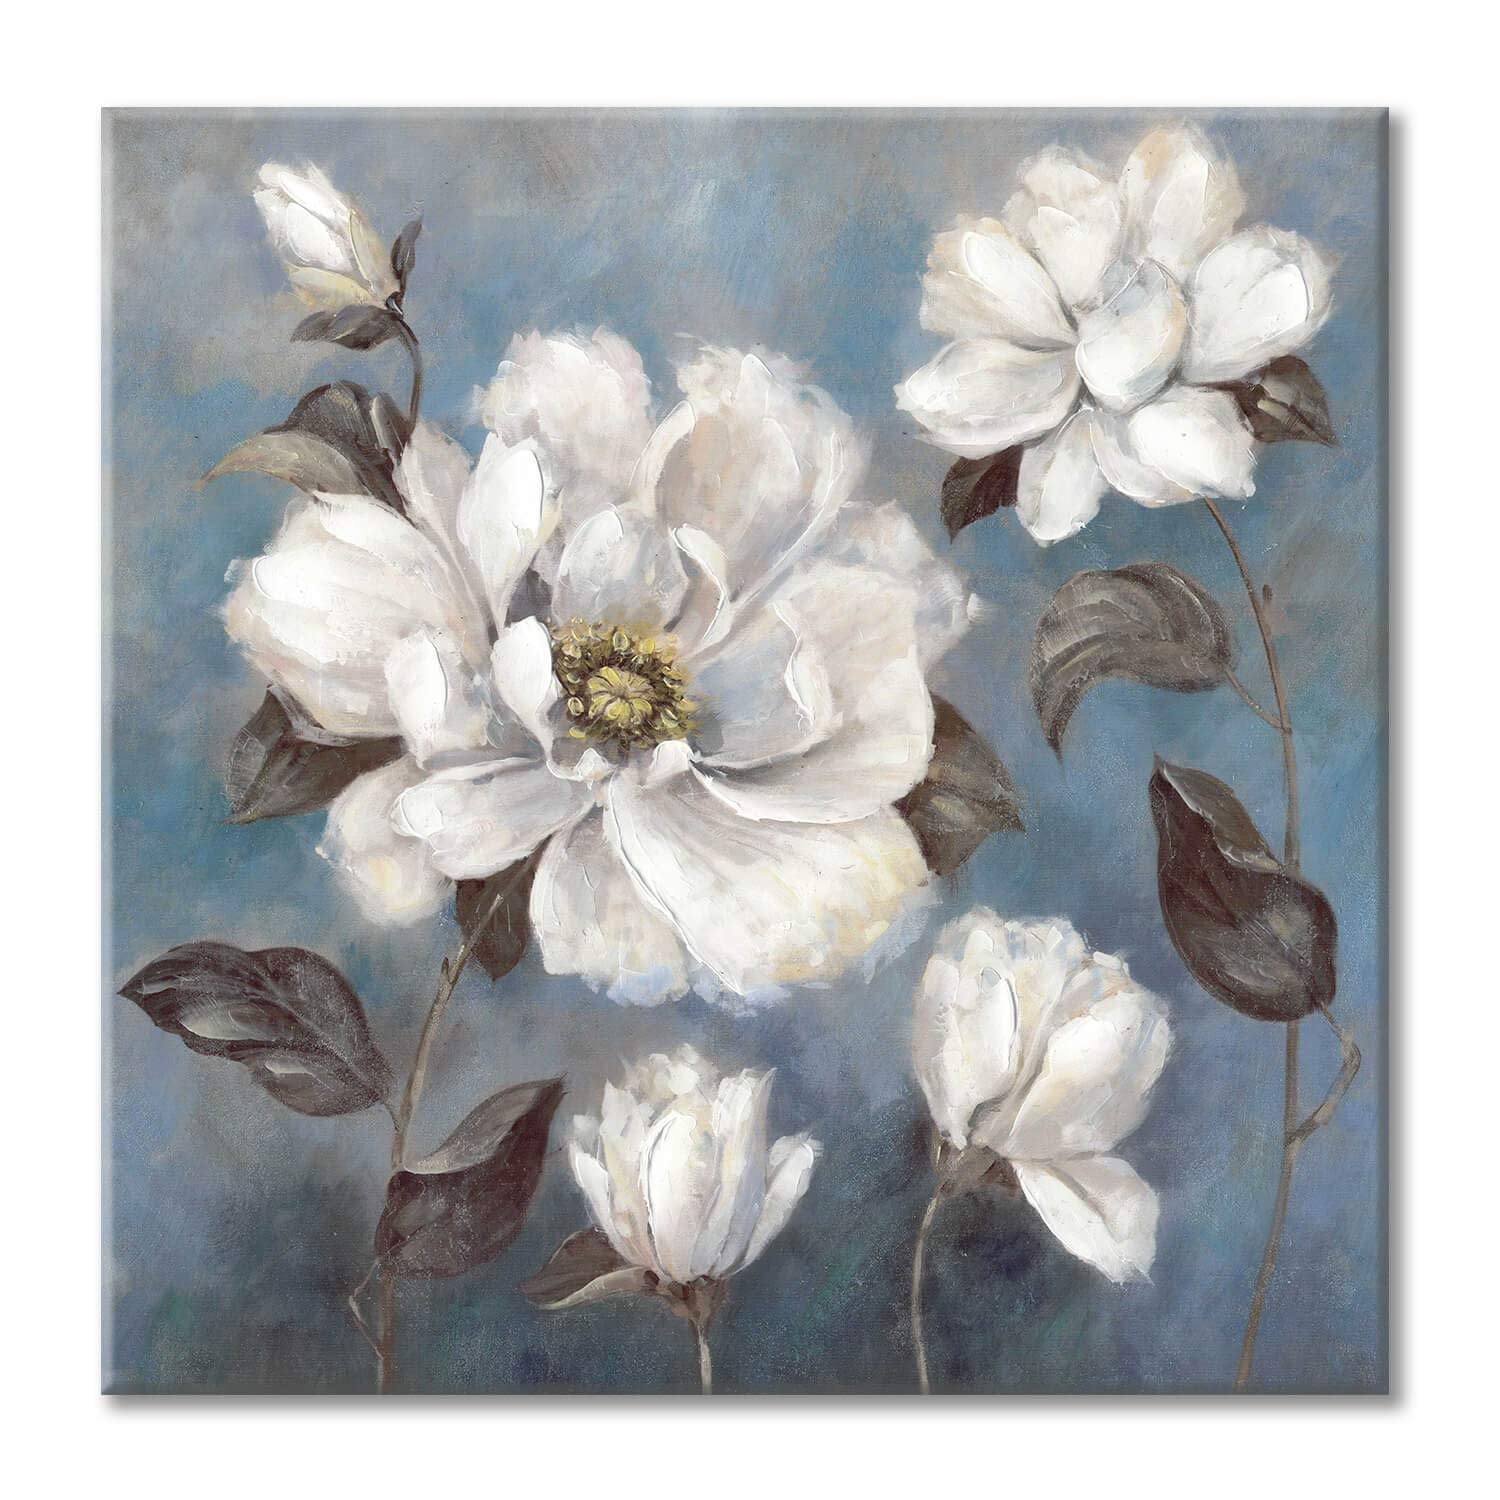 unframed fine art White flowers painting classical painting oil on canvas board still life green background flora original artwork